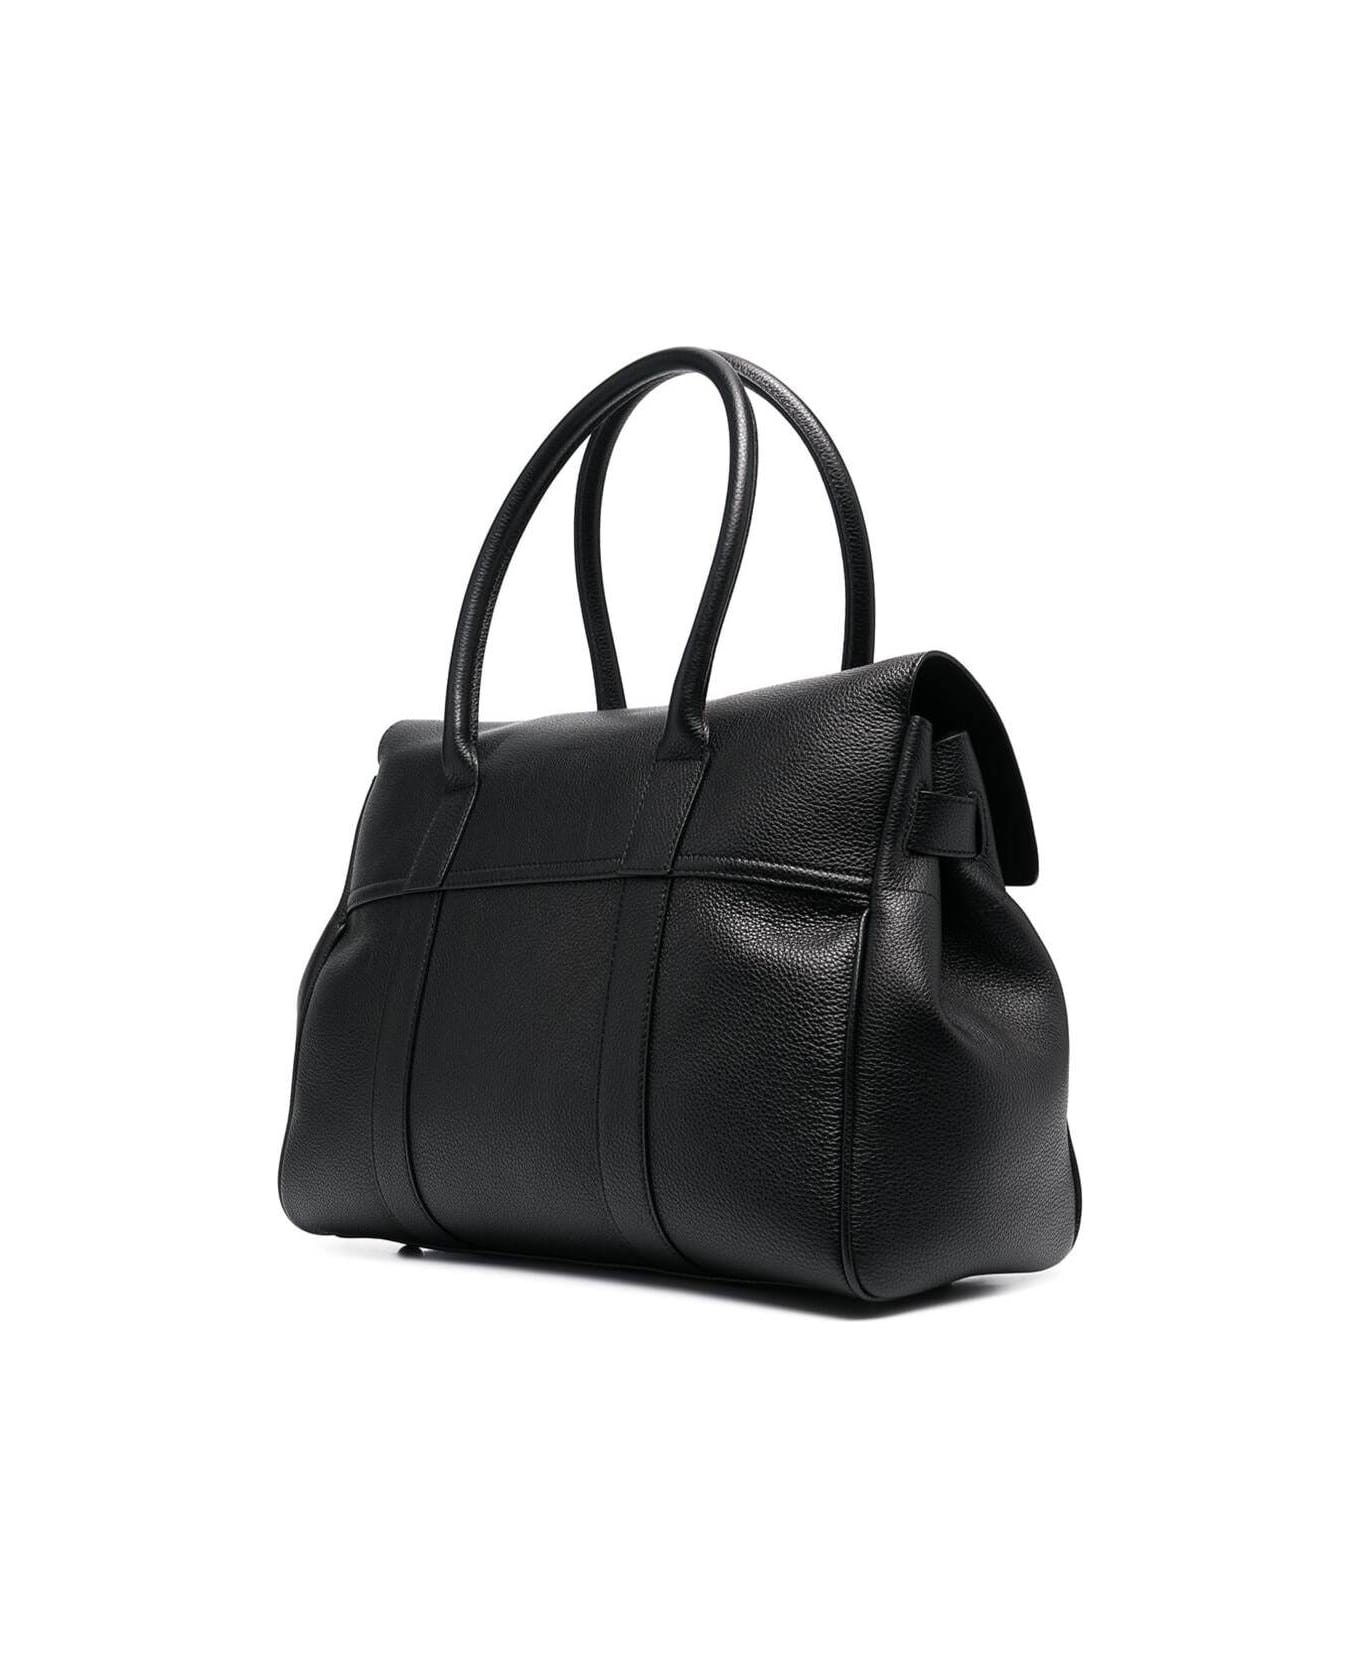 Mulberry 'bayswater' Black Handbag With Twist-lock Fastening In Grainy Leather Woman - Black トートバッグ